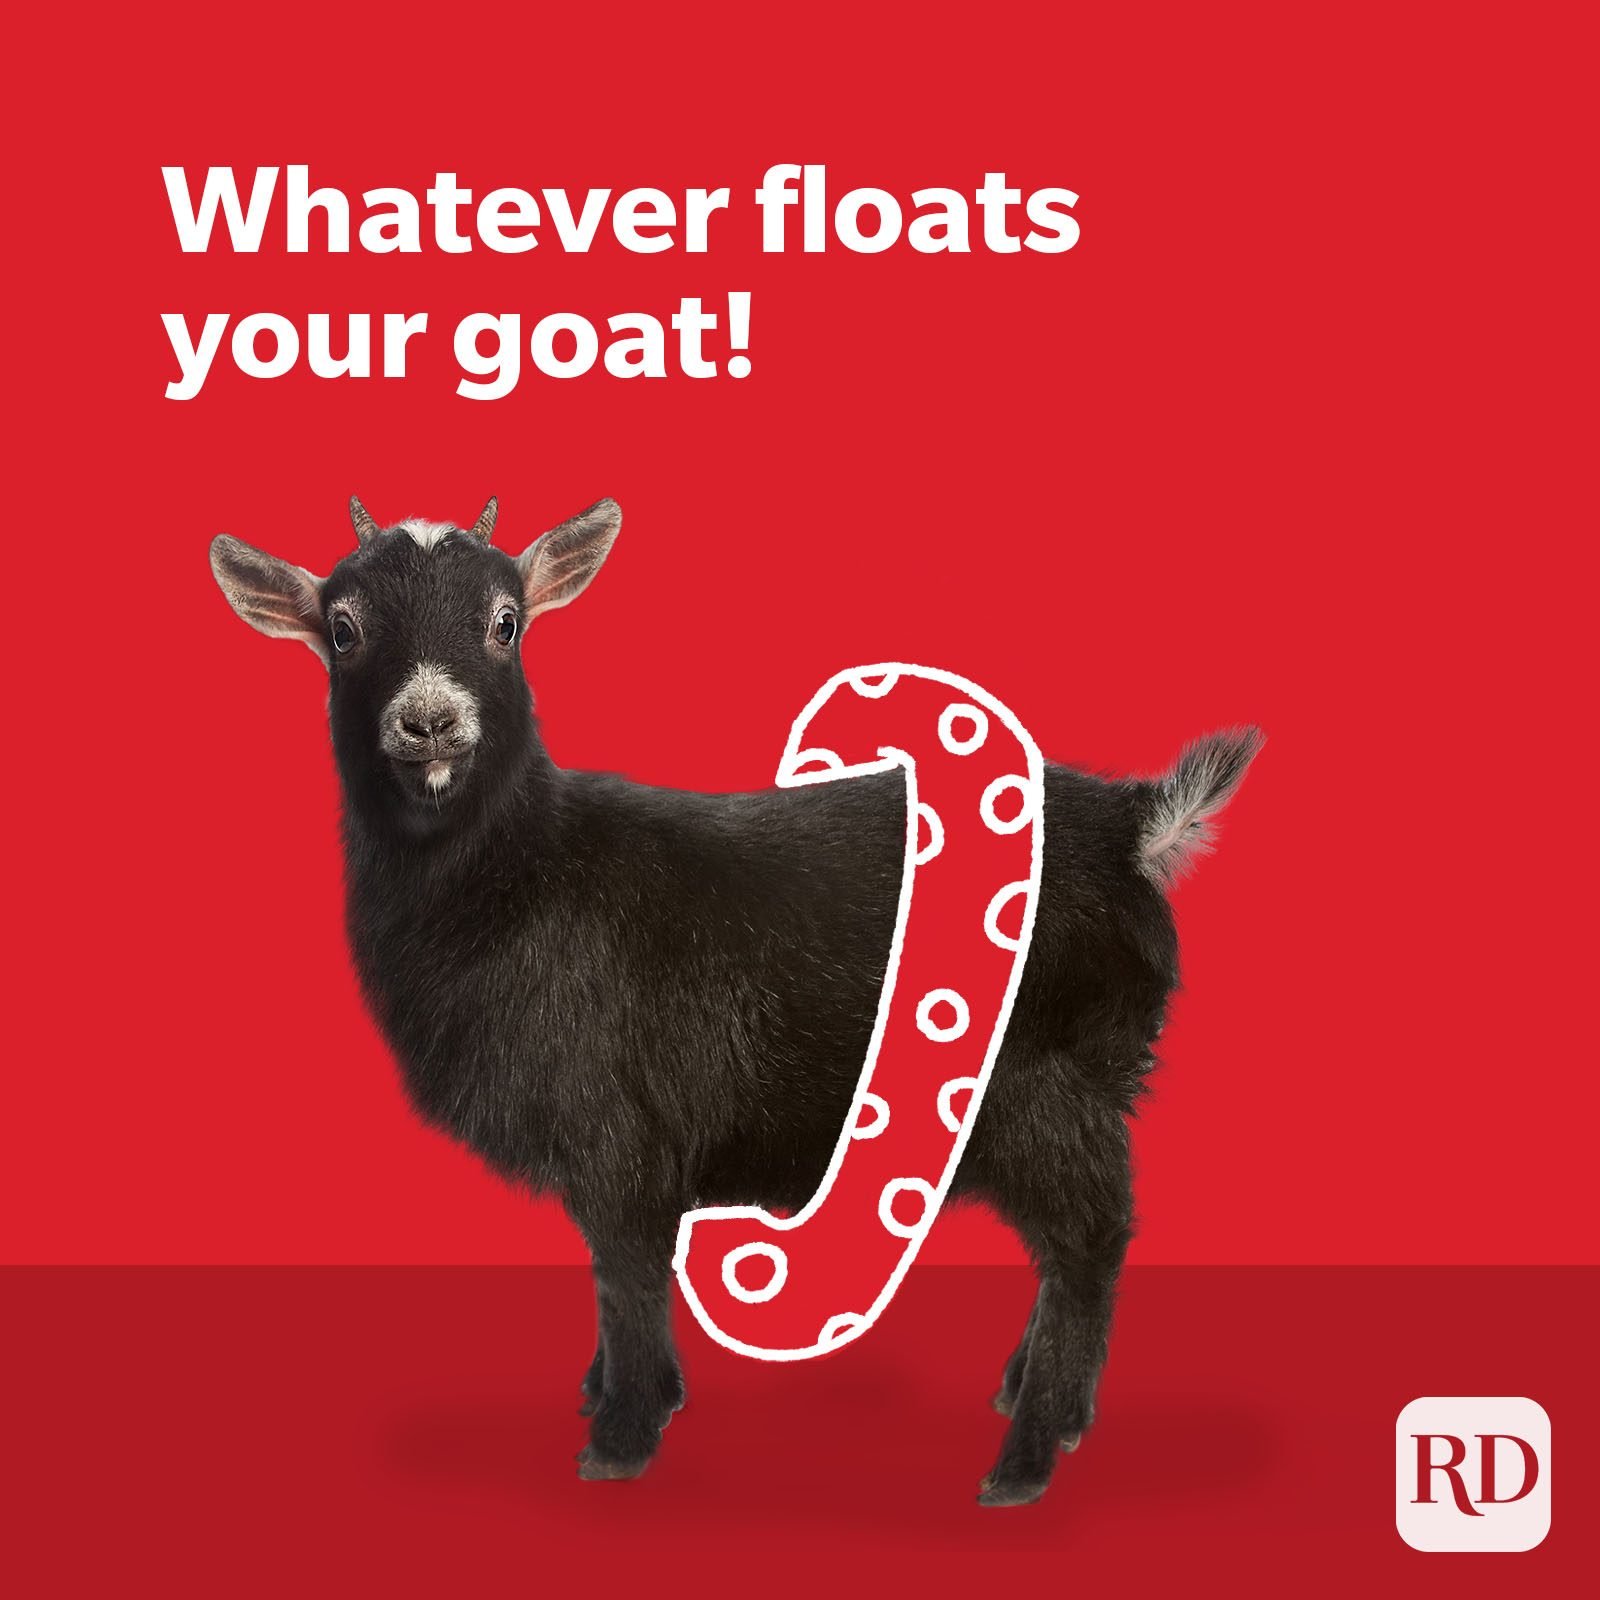 55 Goat Puns That Are So Baaad, They're Good | Funny Goat Jokes